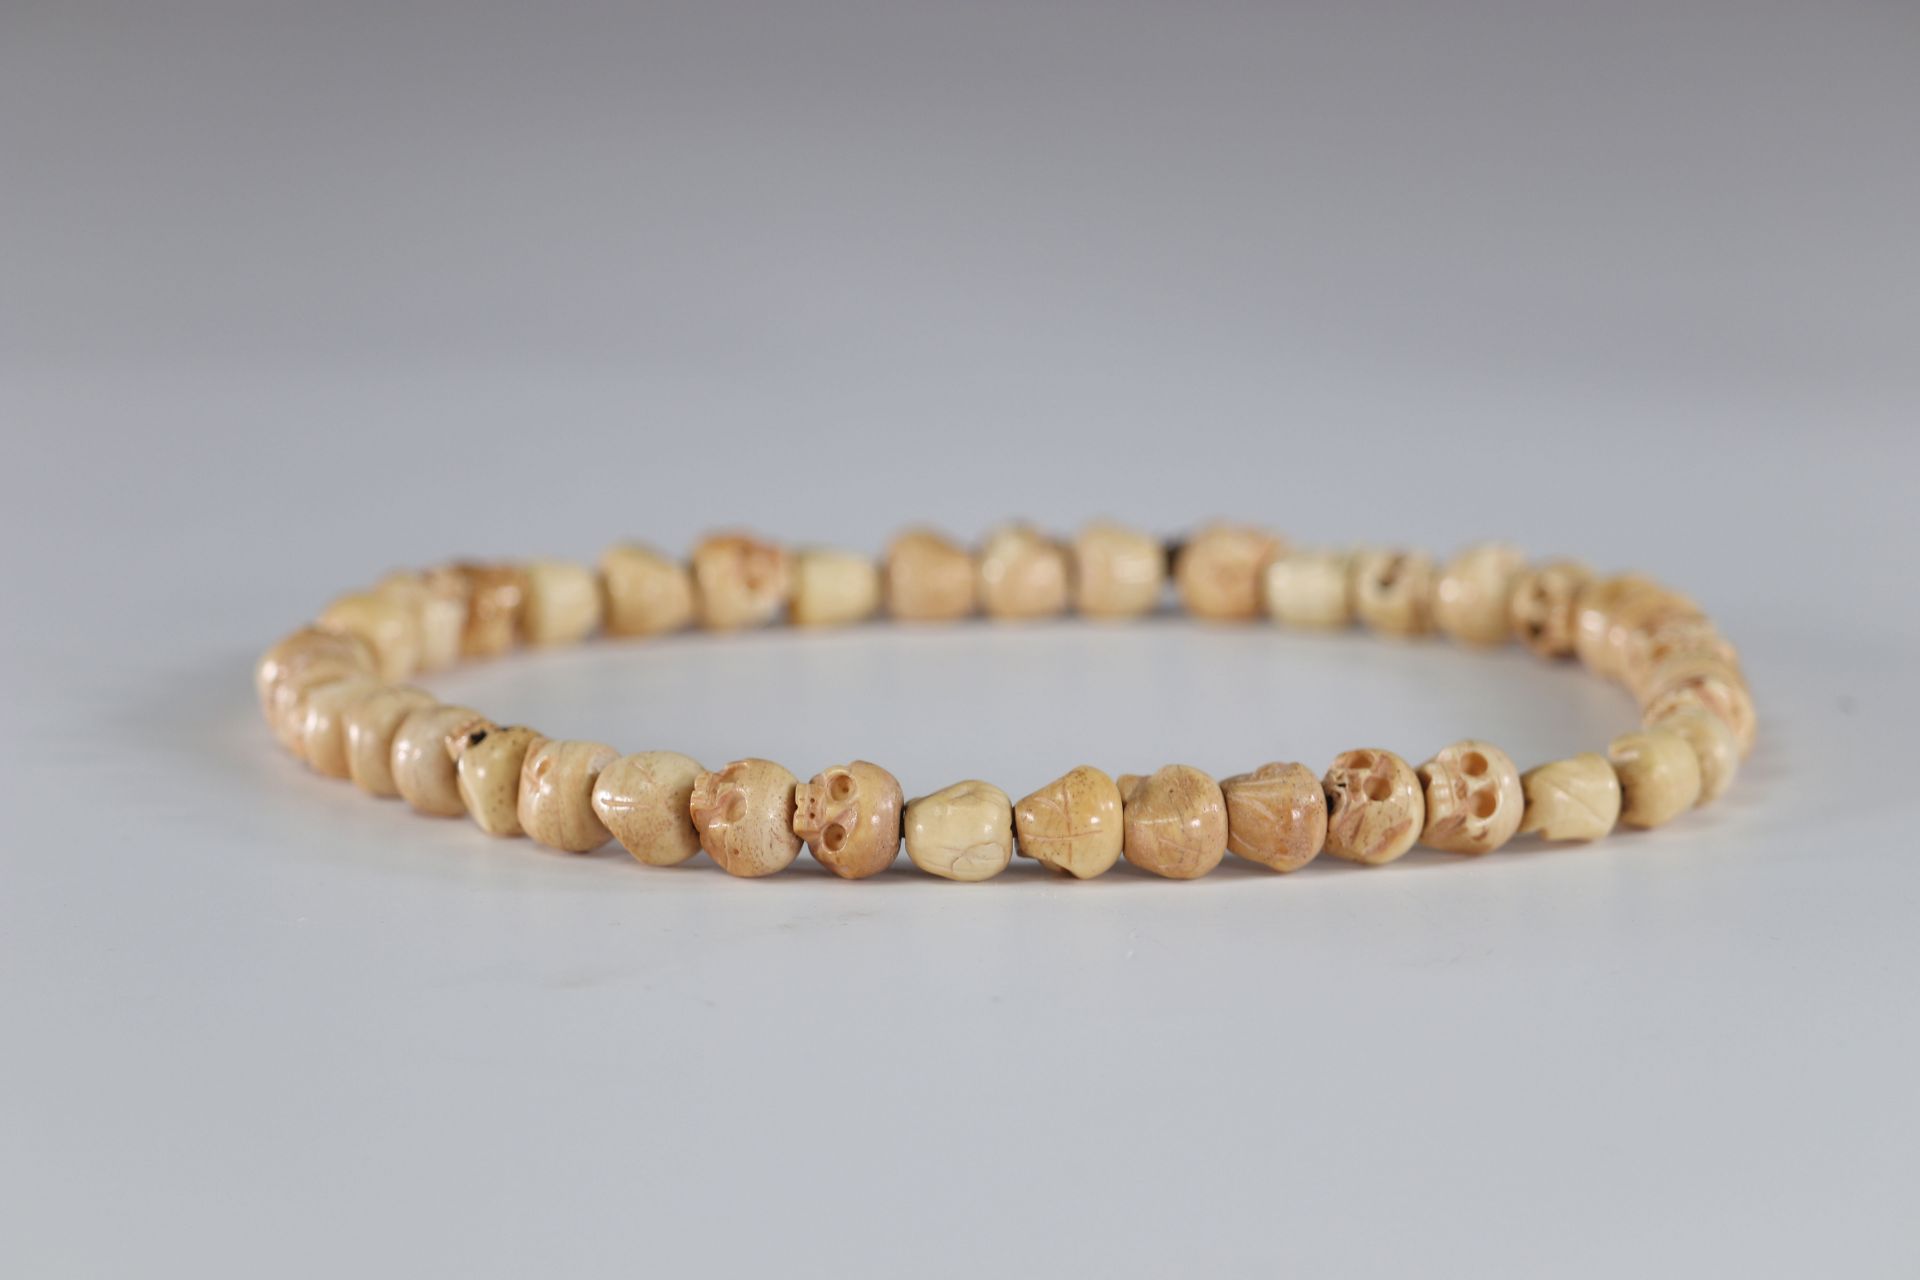 Necklace decorated with carved bone skull - Bild 2 aus 2